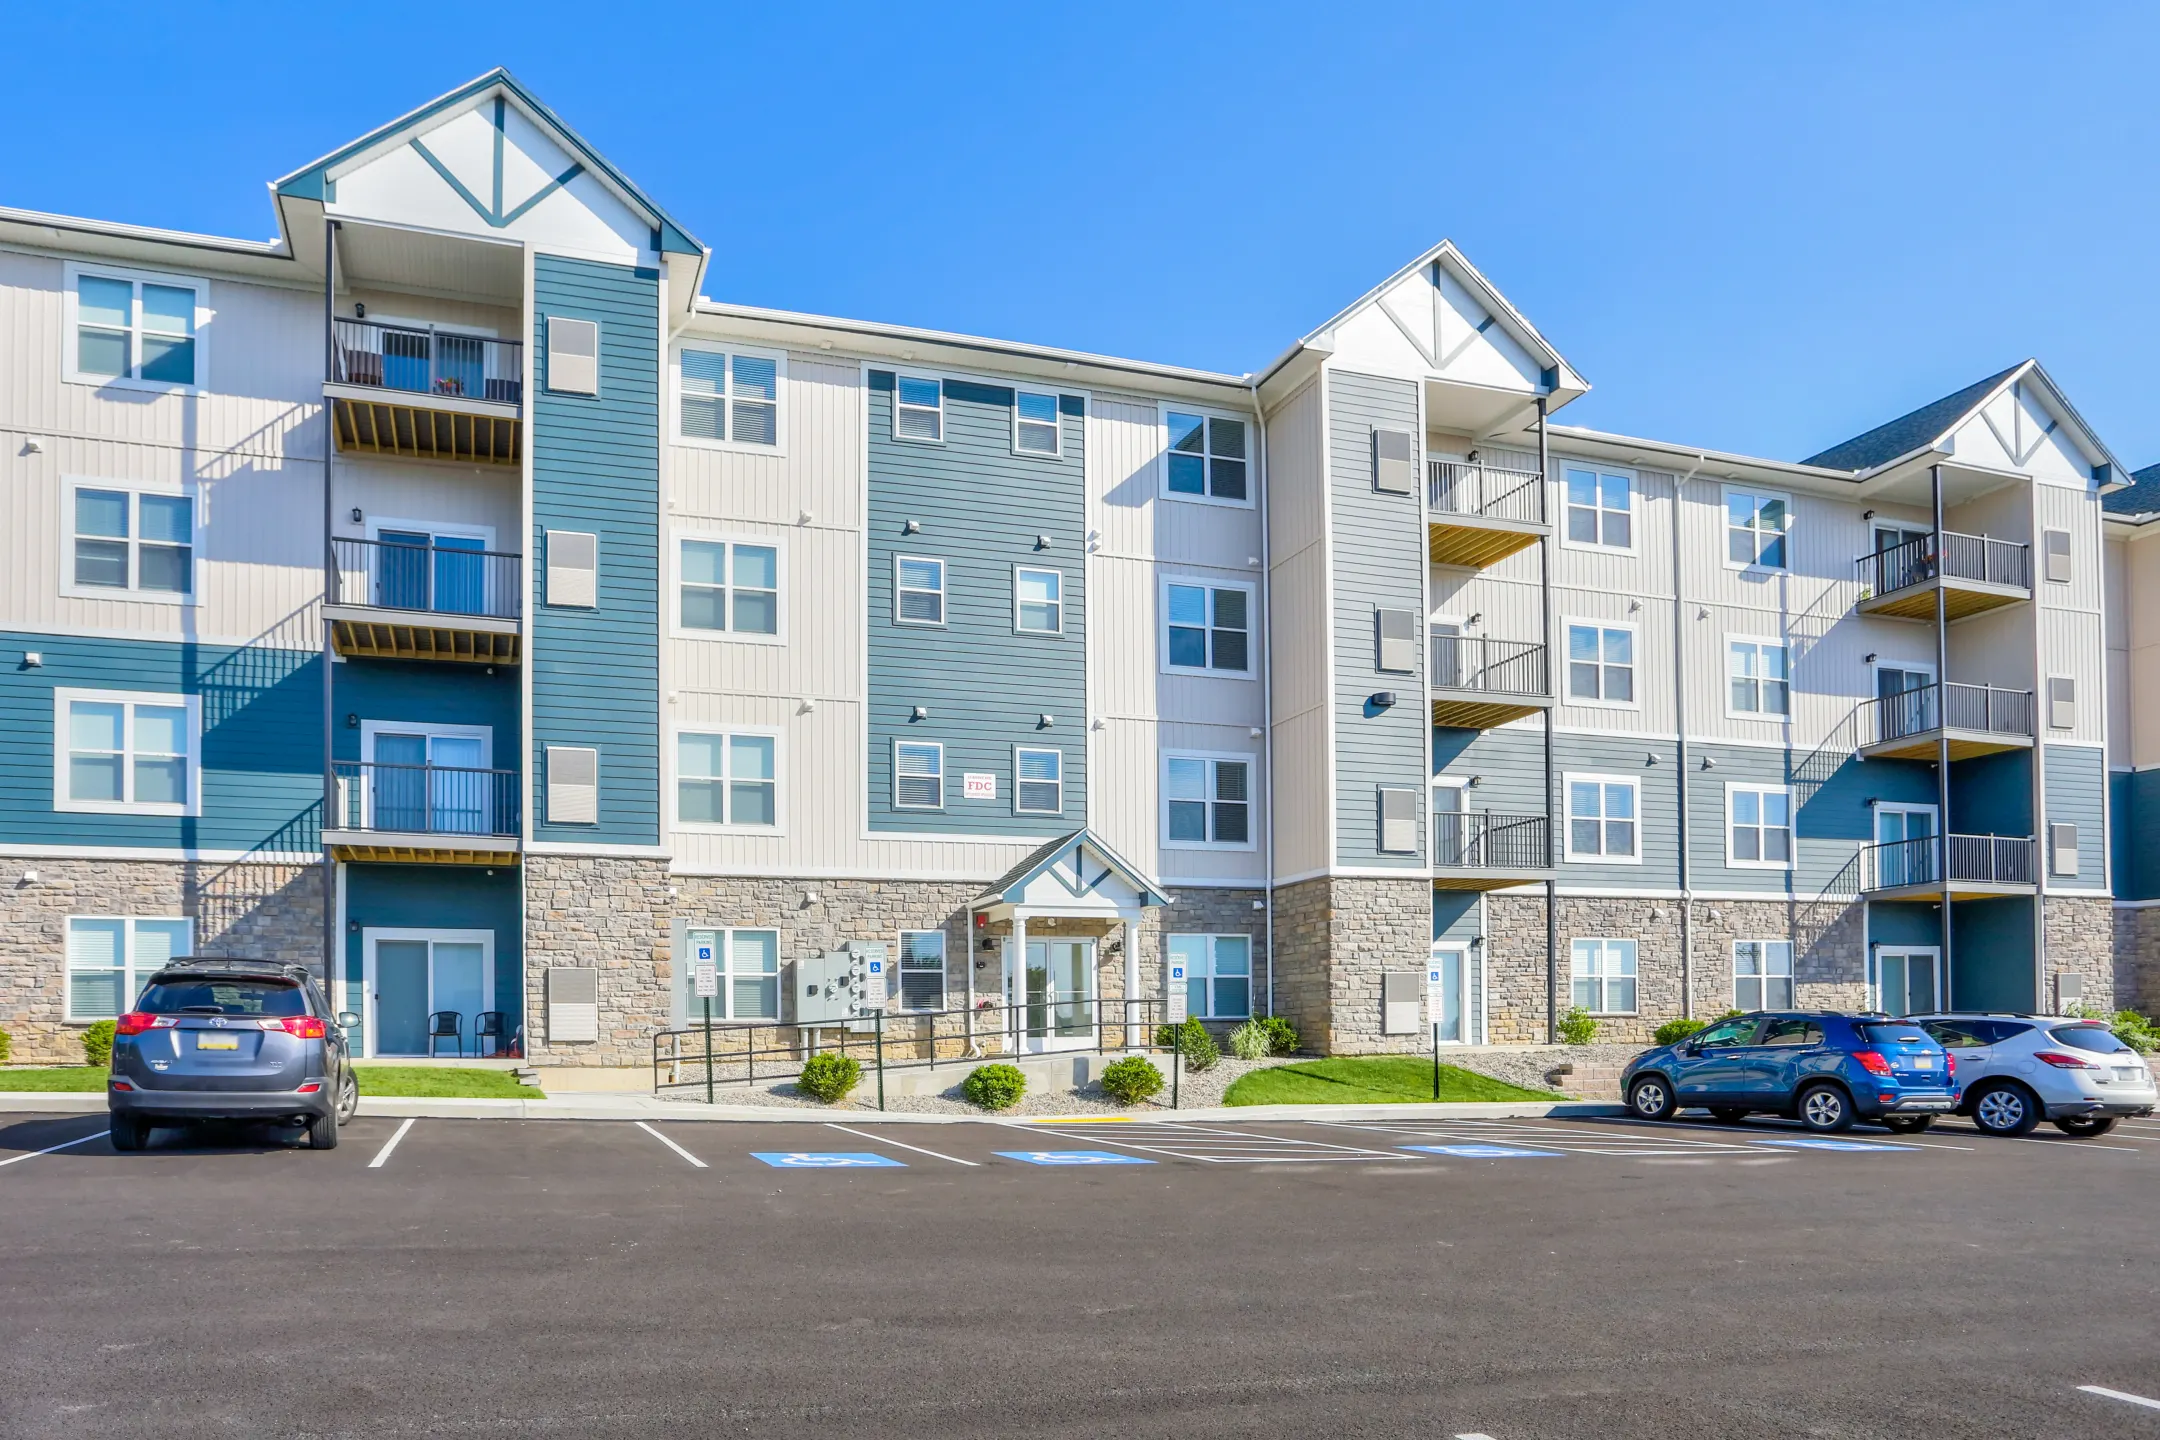 Building - Centerpointe Apartments - Camp Hill, PA